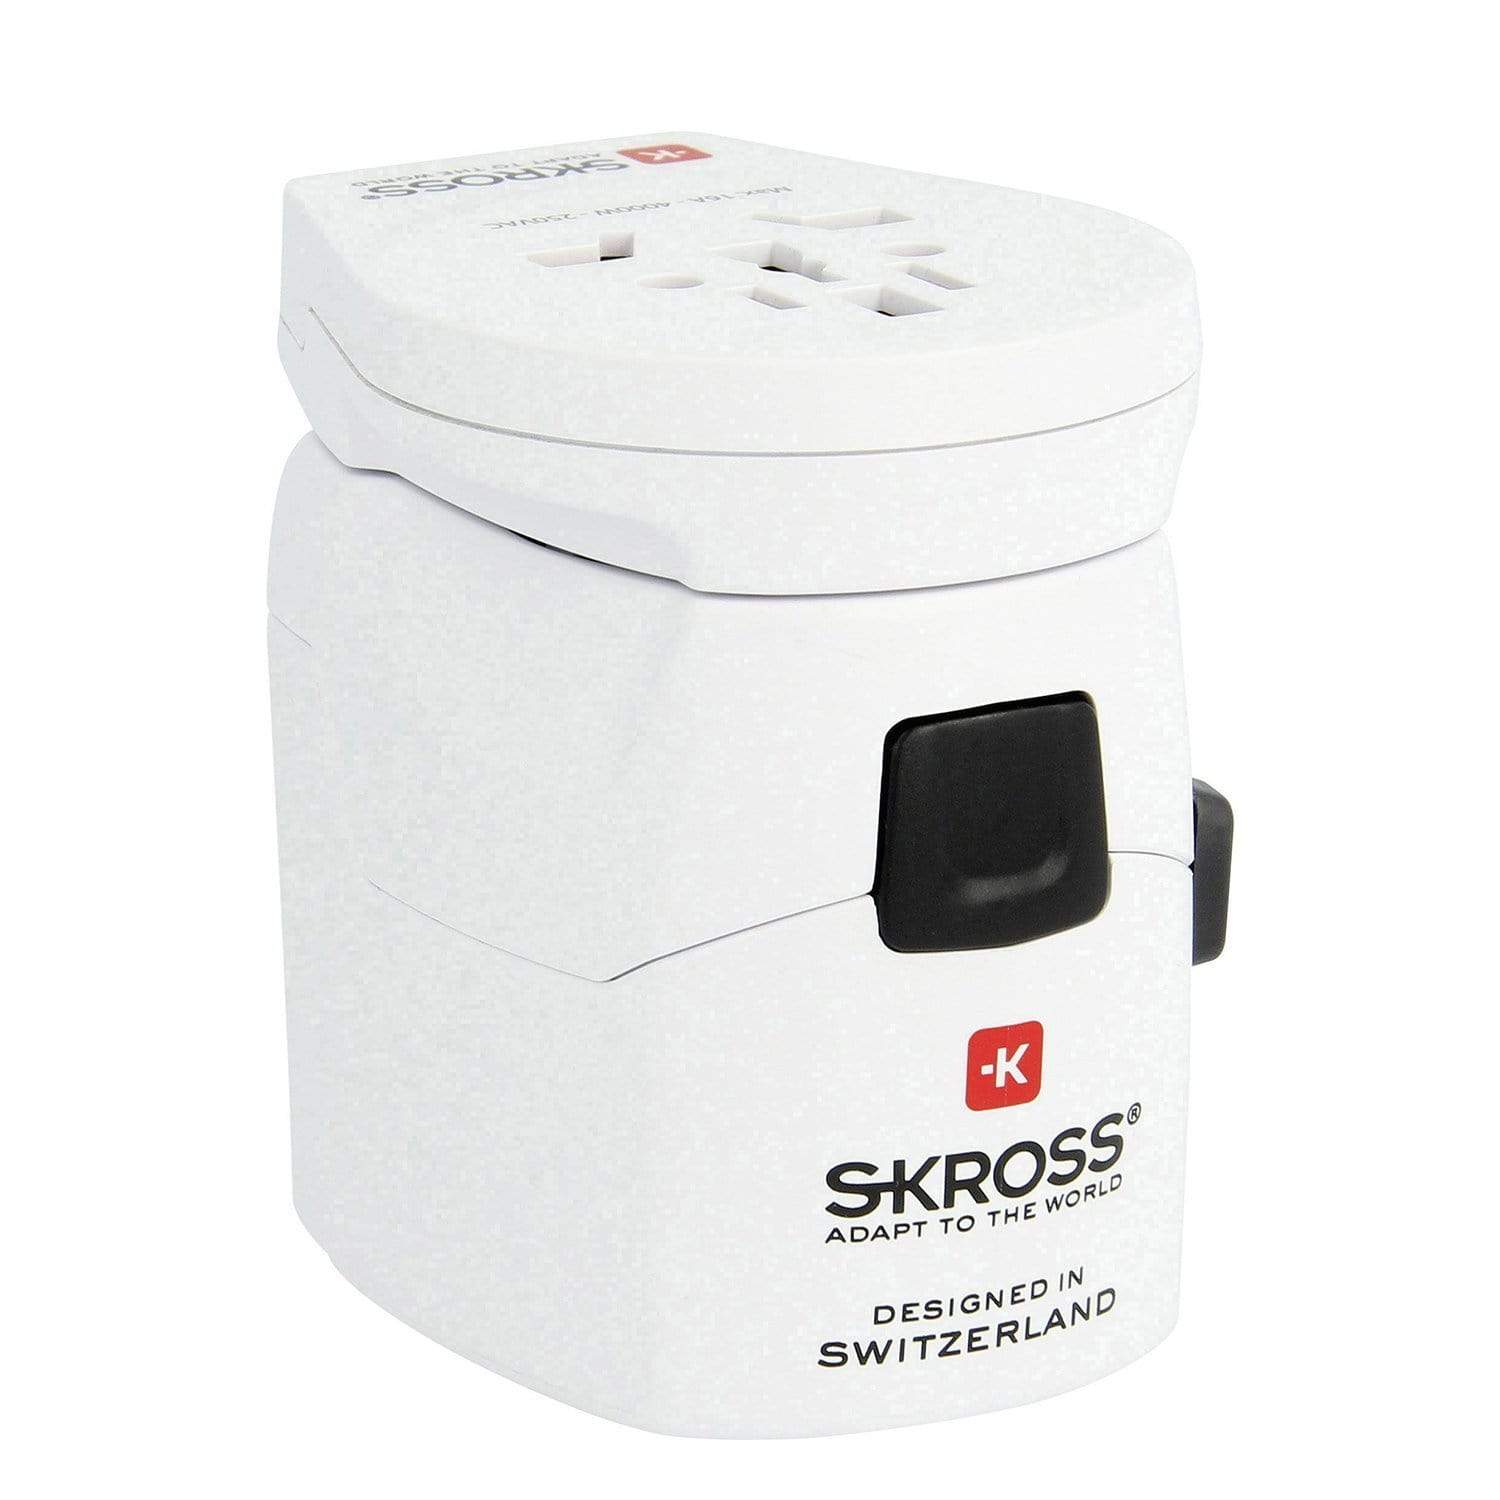 Skross Pro World and USB 6.3 A Multi Plug Adapter - White - 1302535 - Jashanmal Home